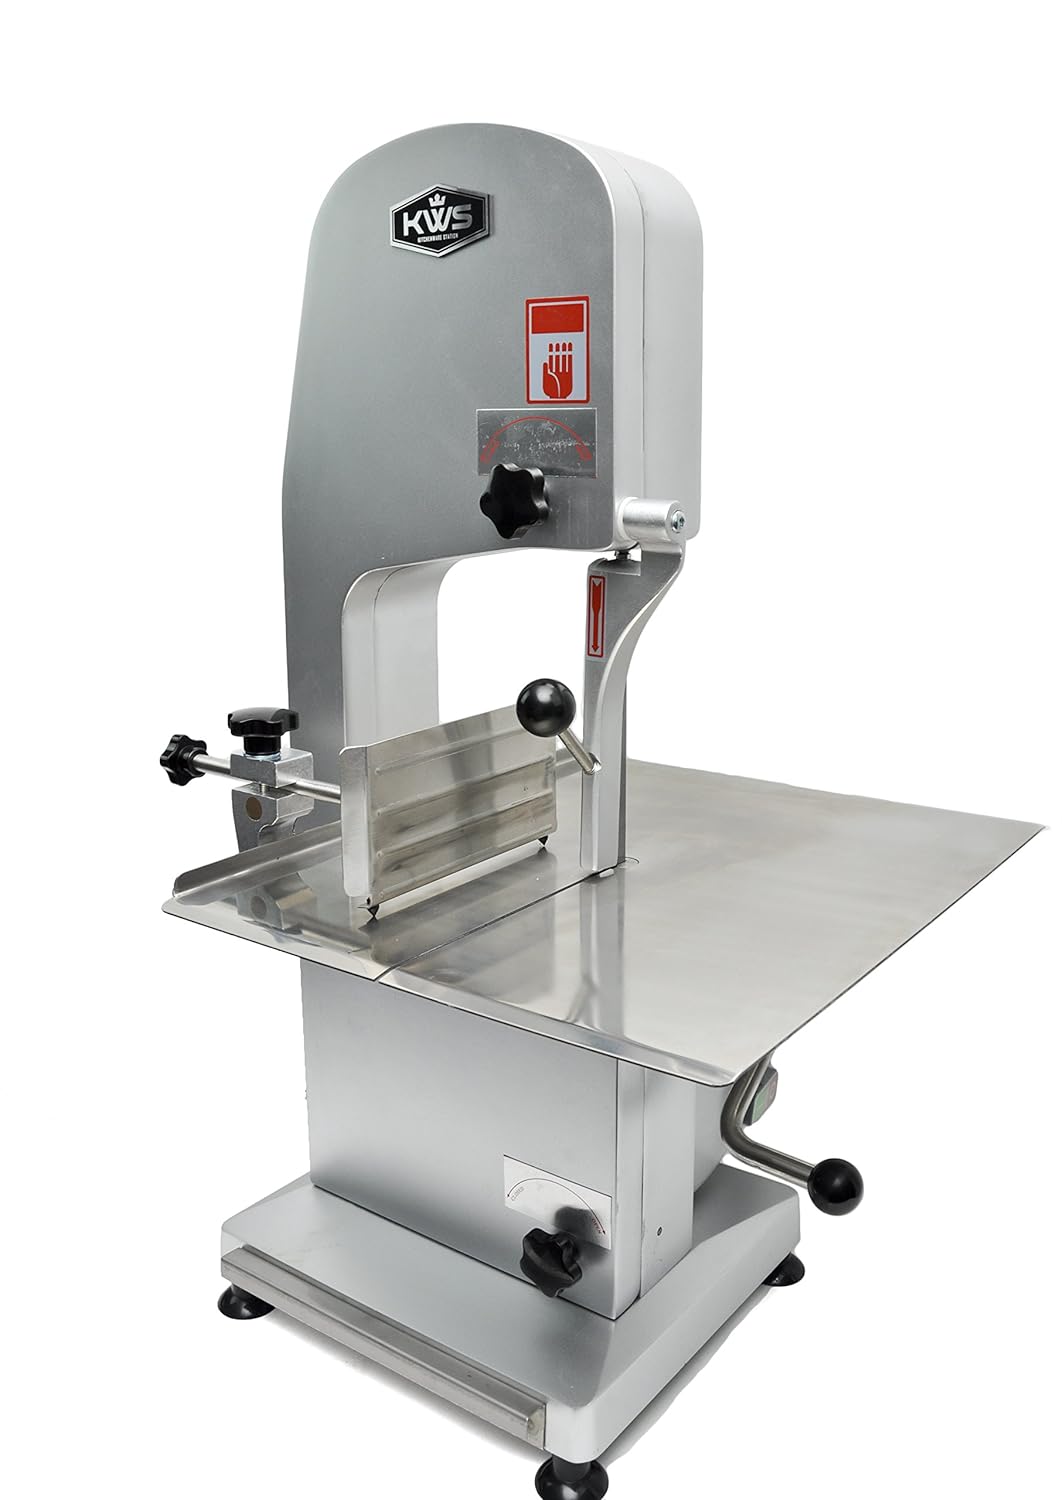 KitchenWare Station KWS B-210 Commercial 1900W 2.5HP Electric Meat Band Saw Bone Sawing Machine/ Slicer Heavy-Duty